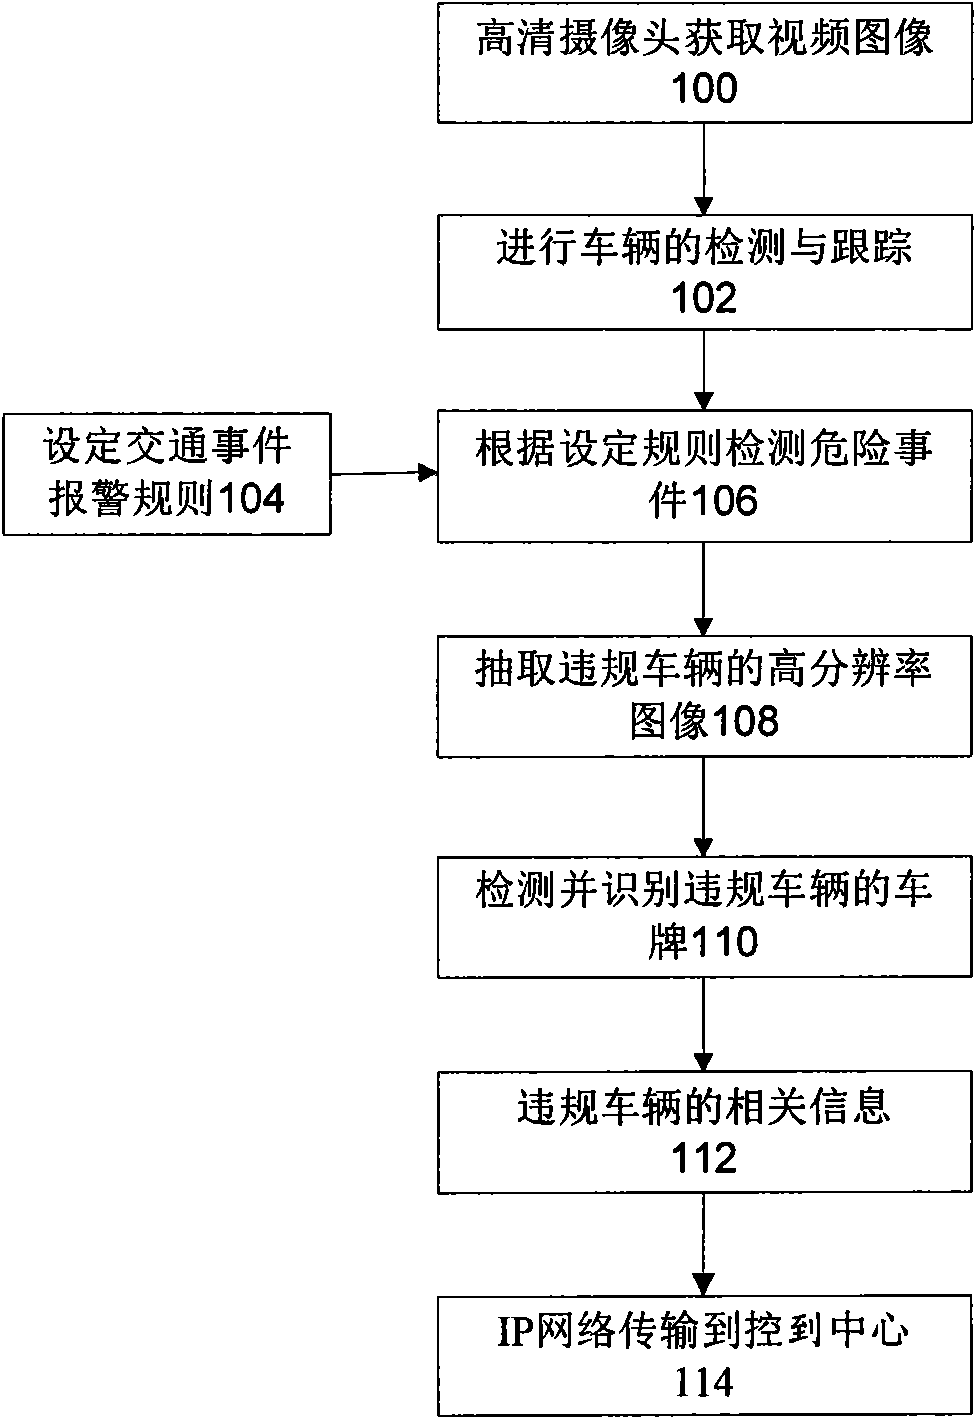 Automatic license plate recognition method and system